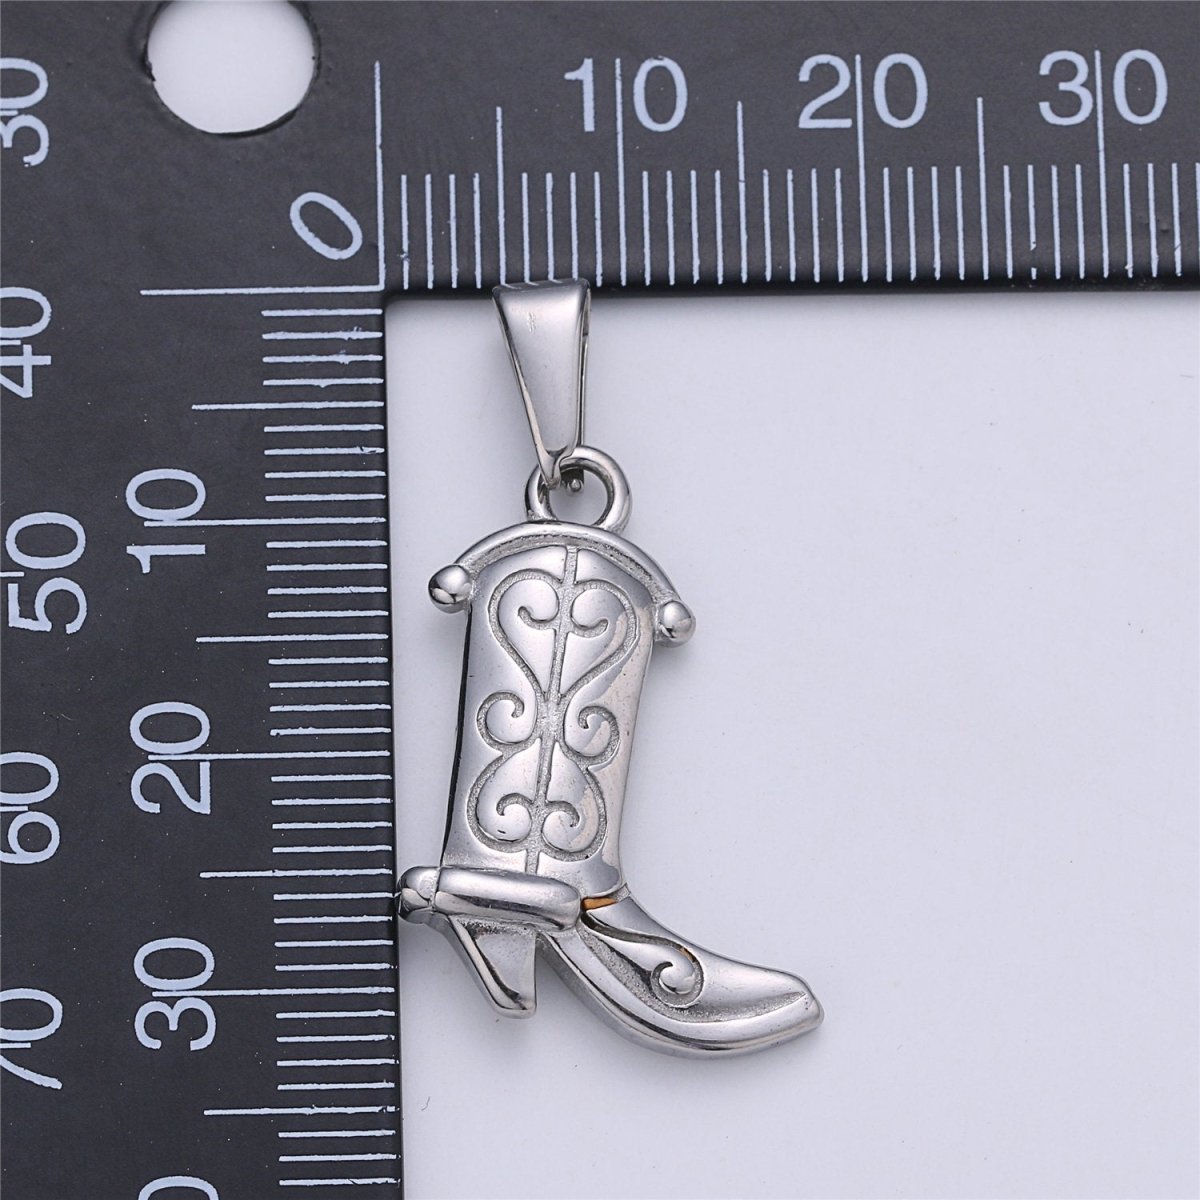 Gold Filled Cowgirl Boots Charms- Cowgirl Party Pendant- Silver Cowboy Boot Charm Cowgirl Boots Pendant for Necklace Bracelet J-657 J-662 - DLUXCA